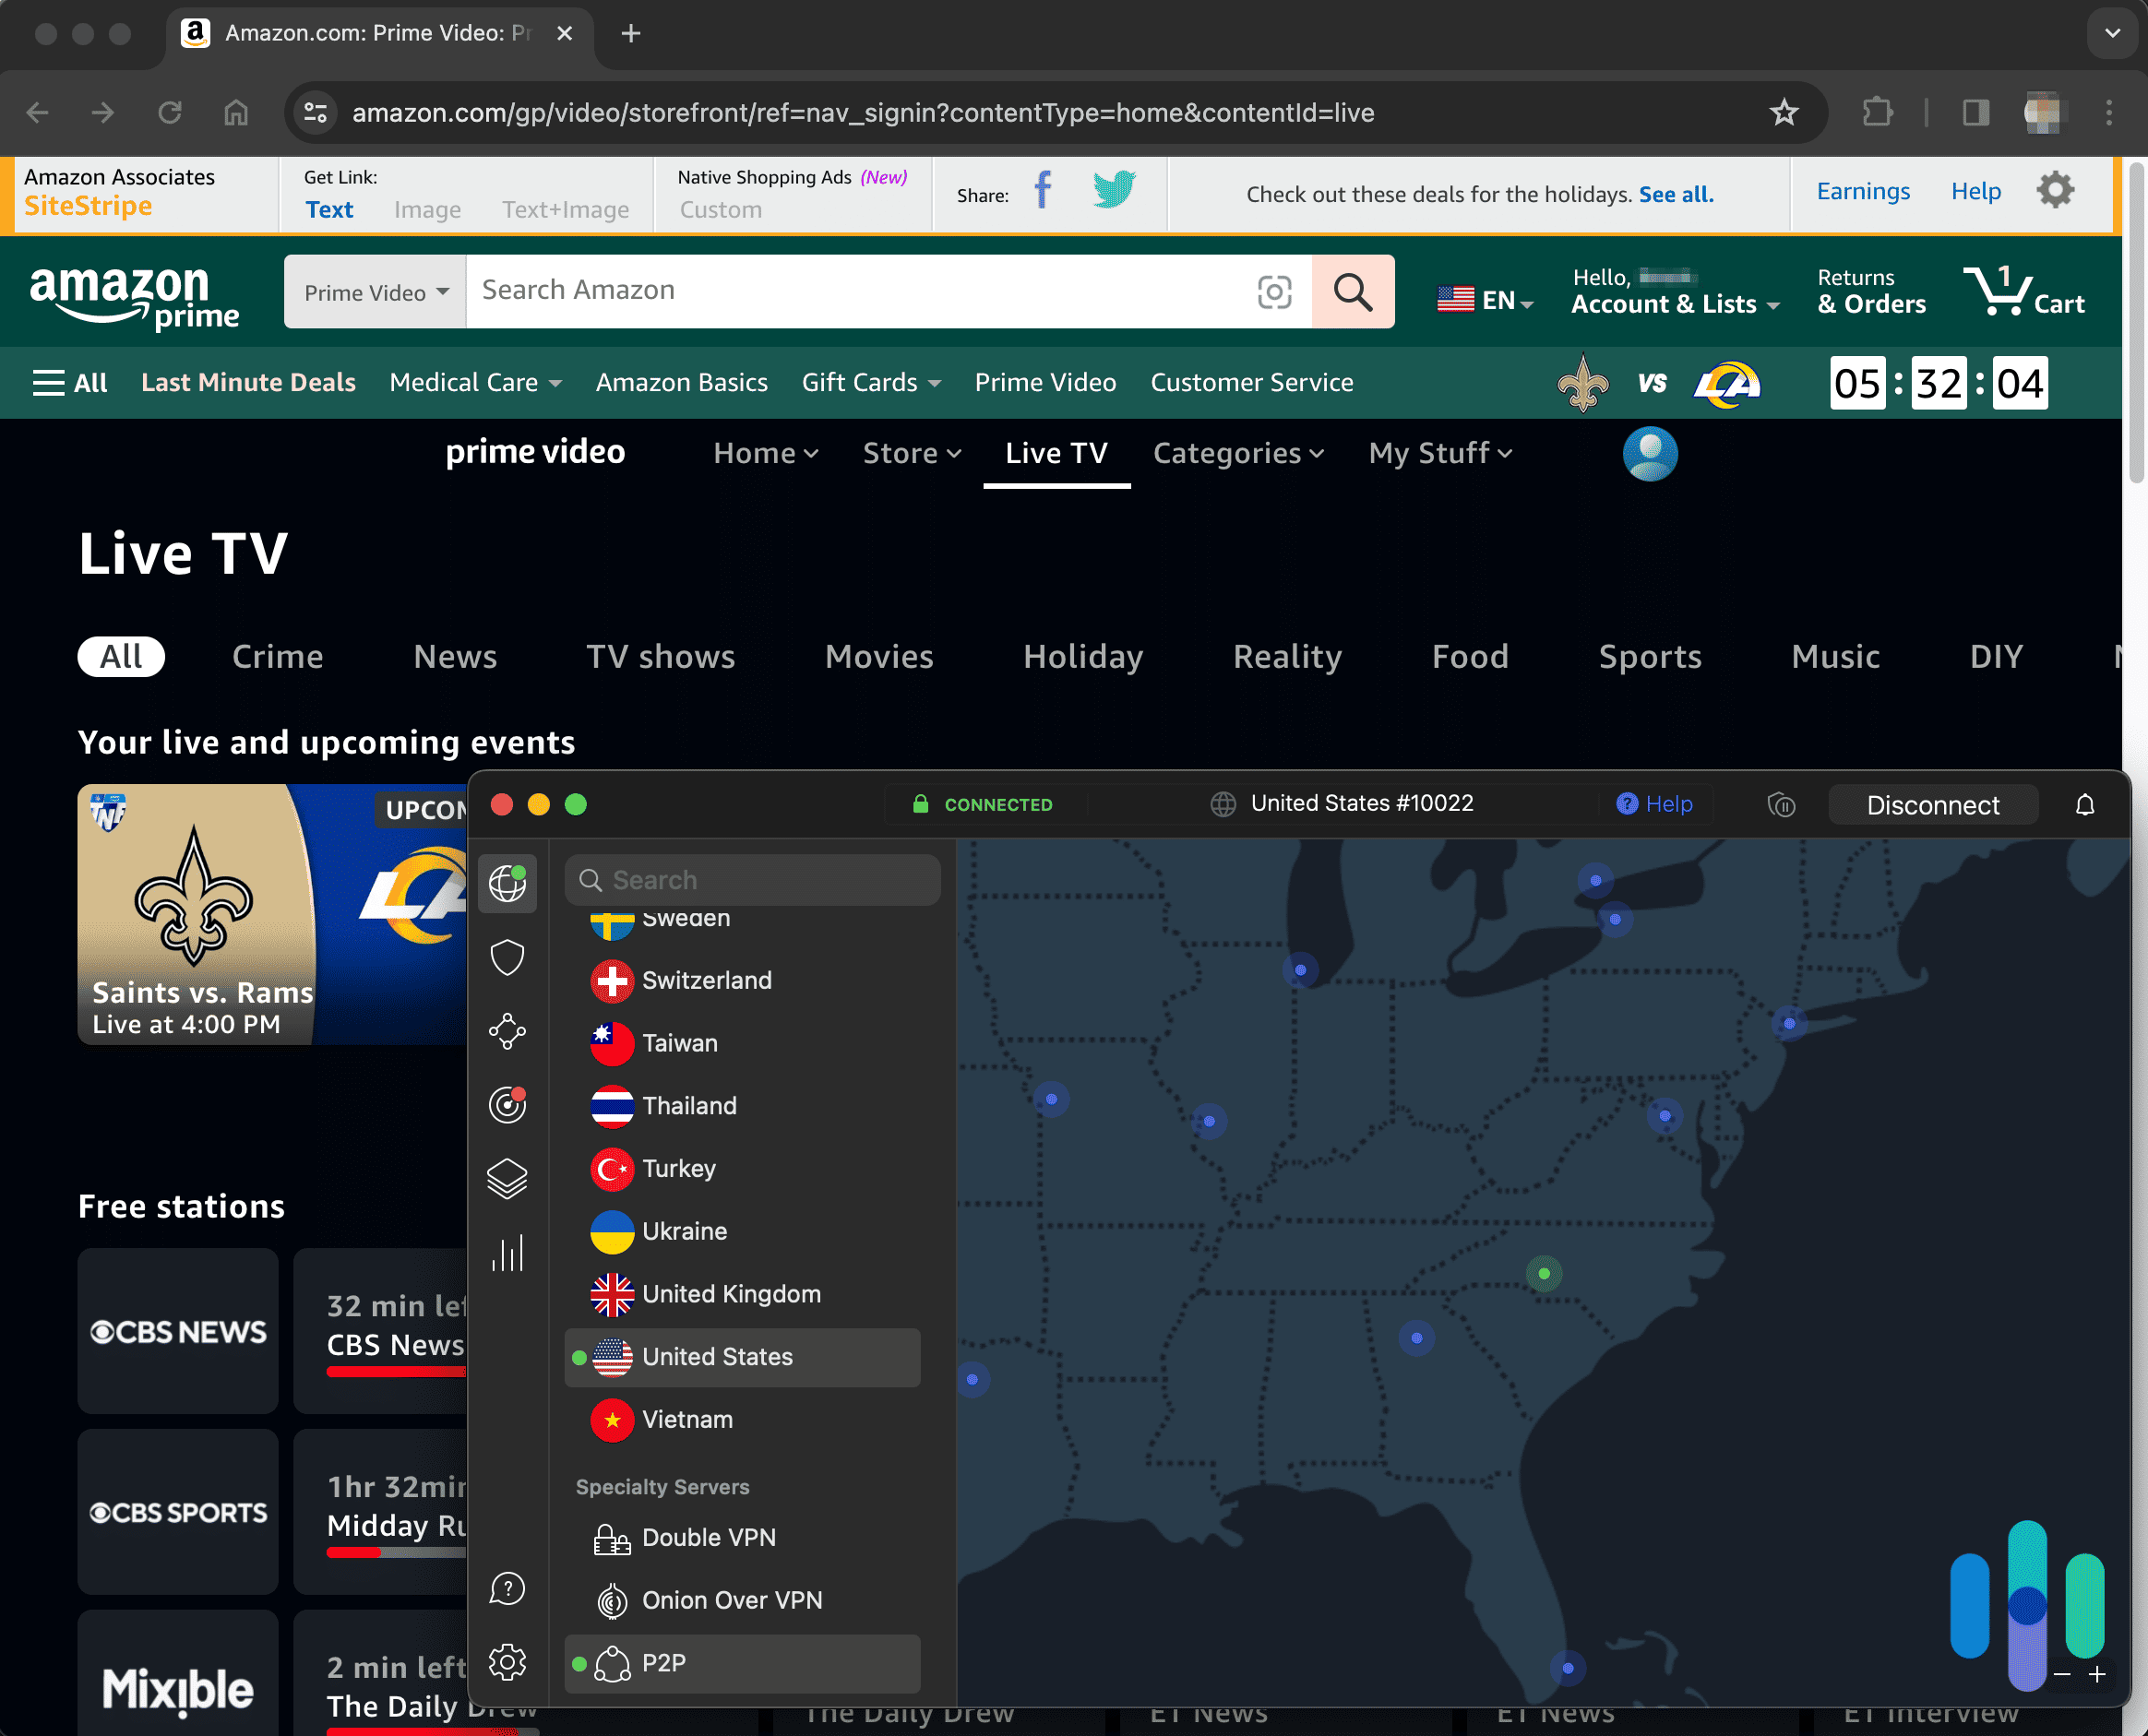 Using Prime Video while connected to NordVPN